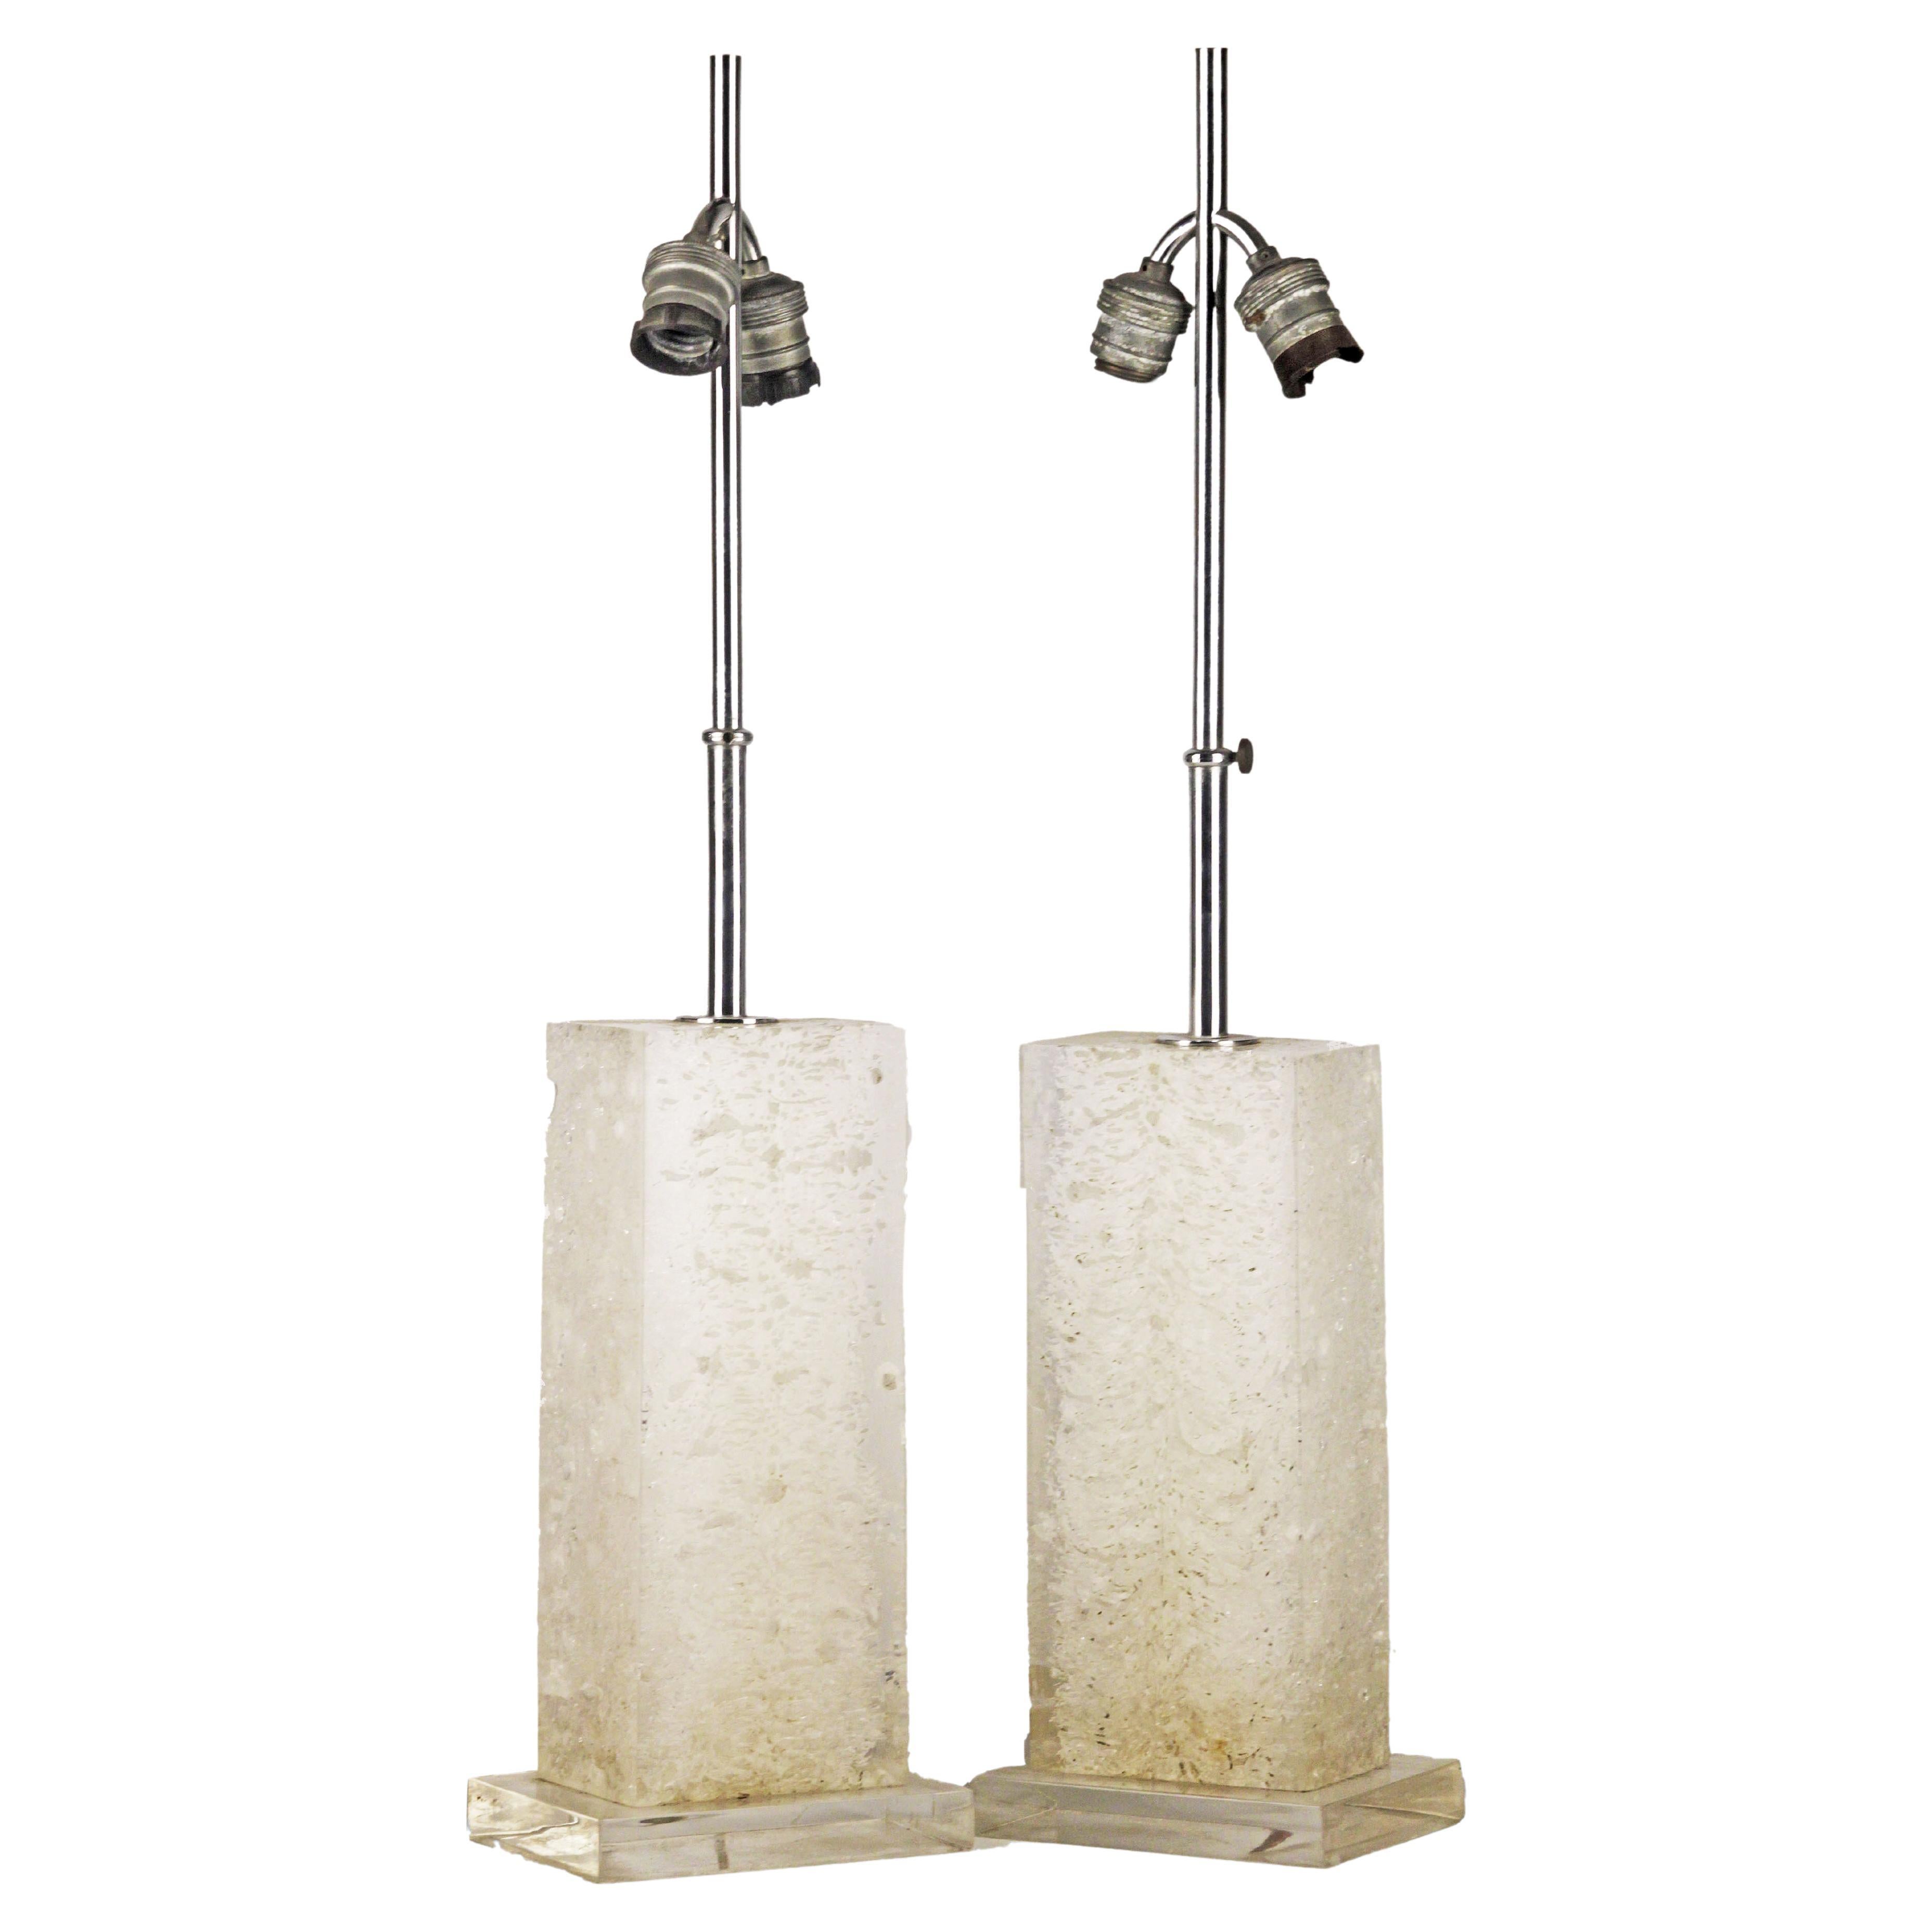 Pair of Danish Design Lamps with Translucent/Textured Acrylic Rectangular Bases For Sale